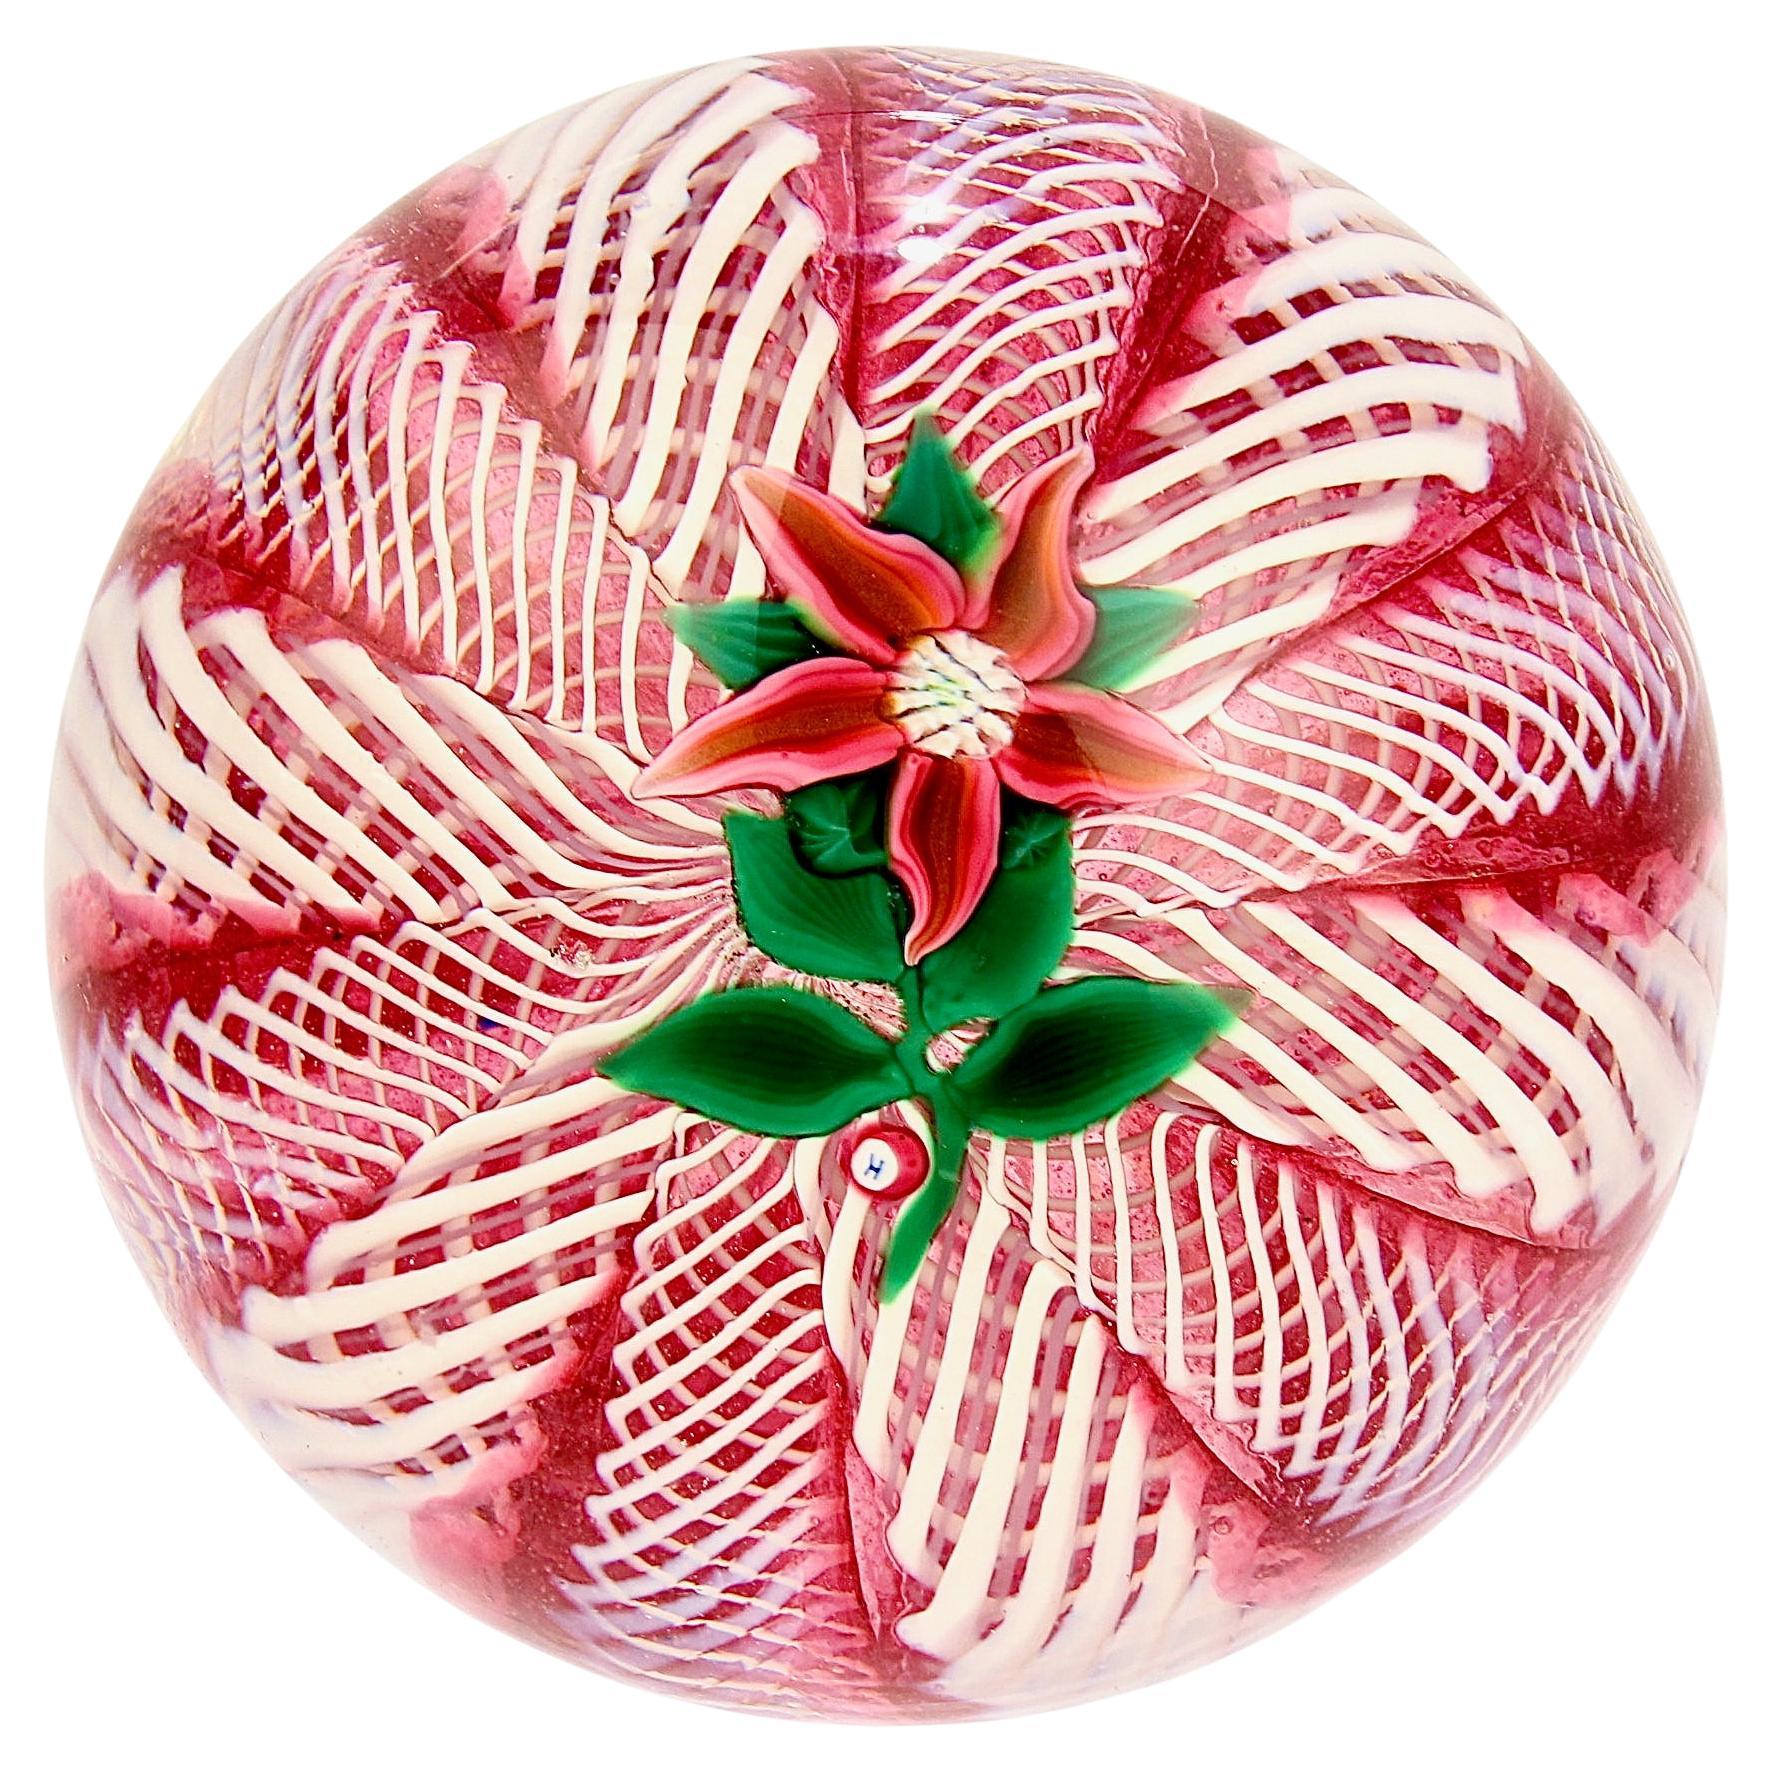  Paul Ysart Poinsettia on a Pink & White Latticino Ground Glass Paperweight For Sale